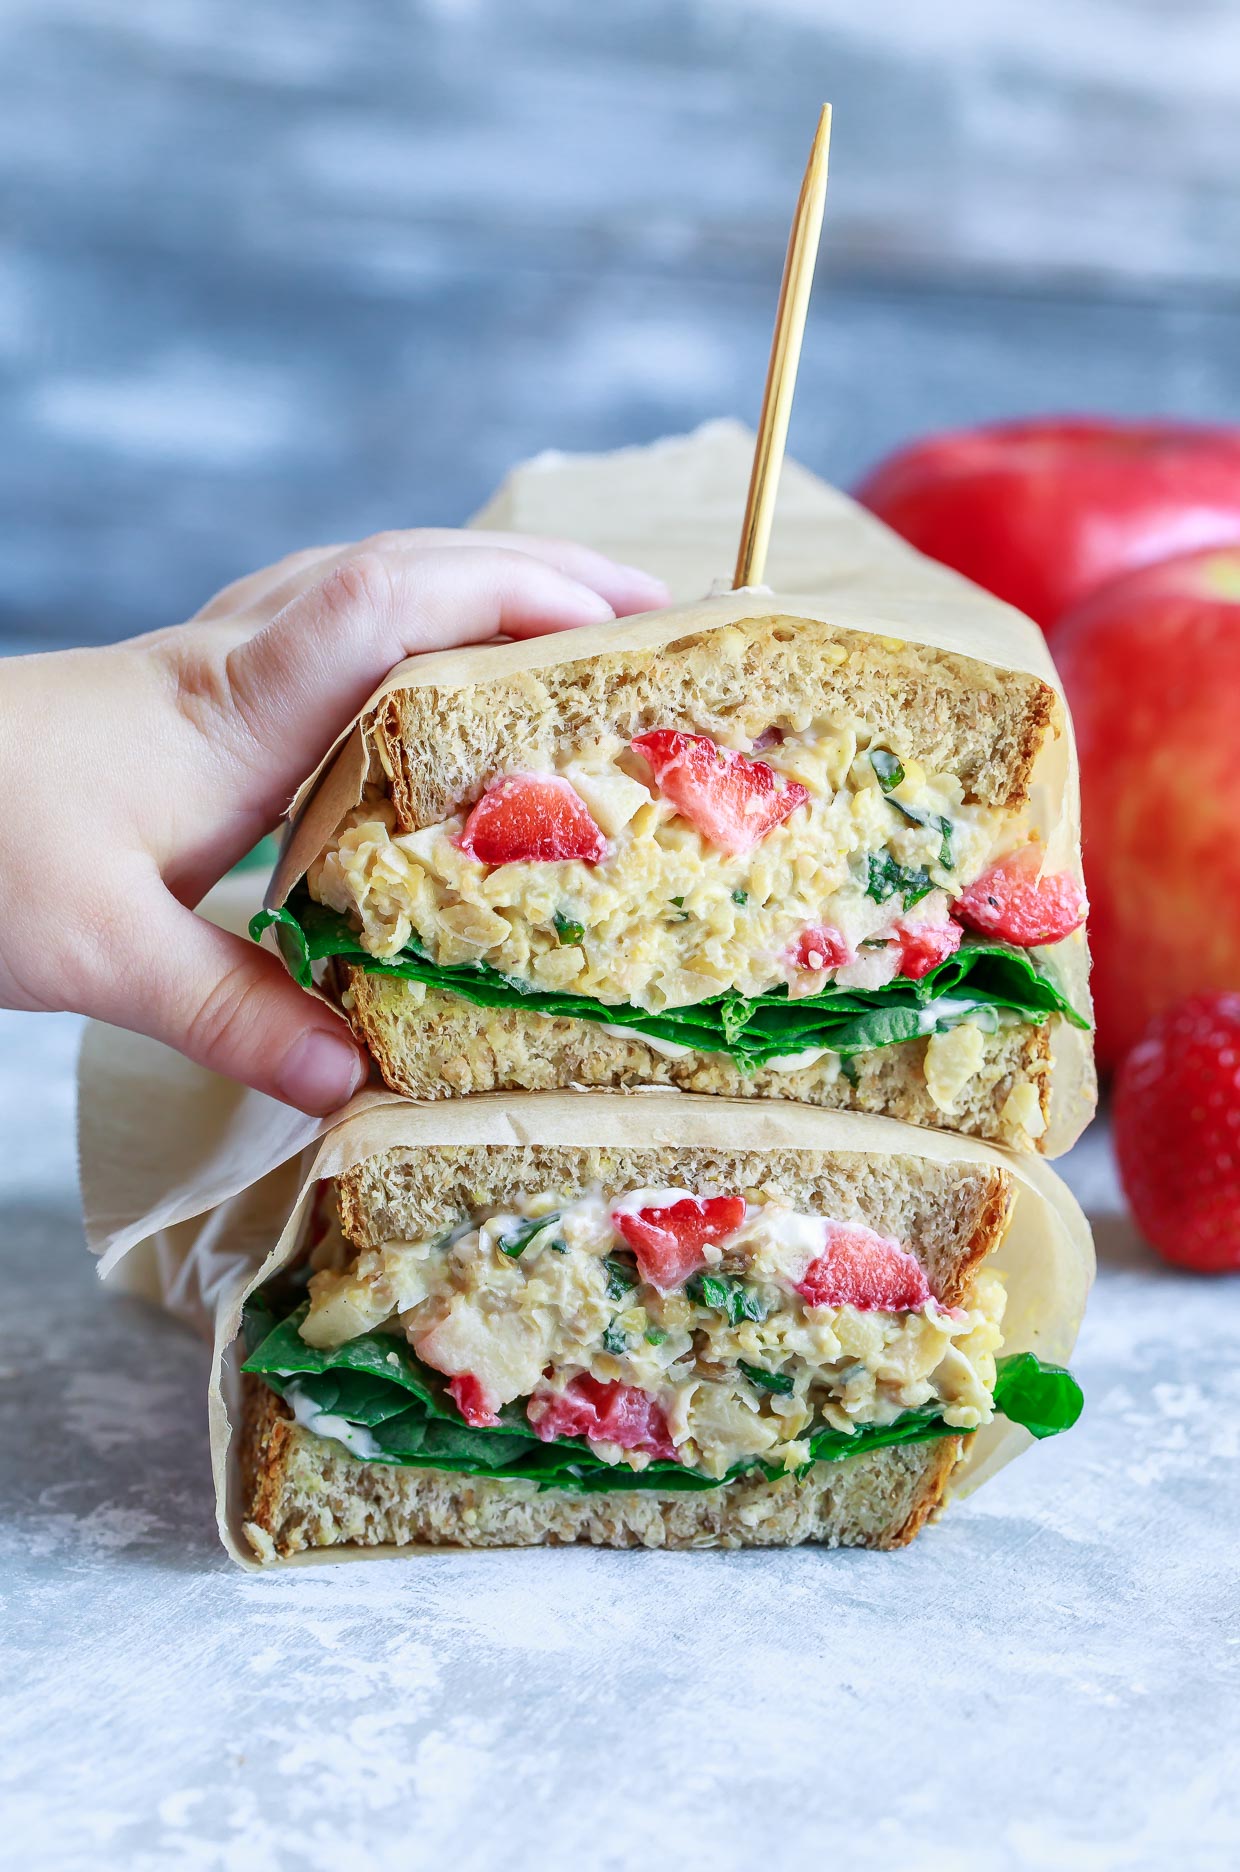 This Strawberry Basil Chickpea Salad Sandwich makes a tasty (and portable!) lunch for work, school, or home. Even better? It's quick, easy, and healthy too!